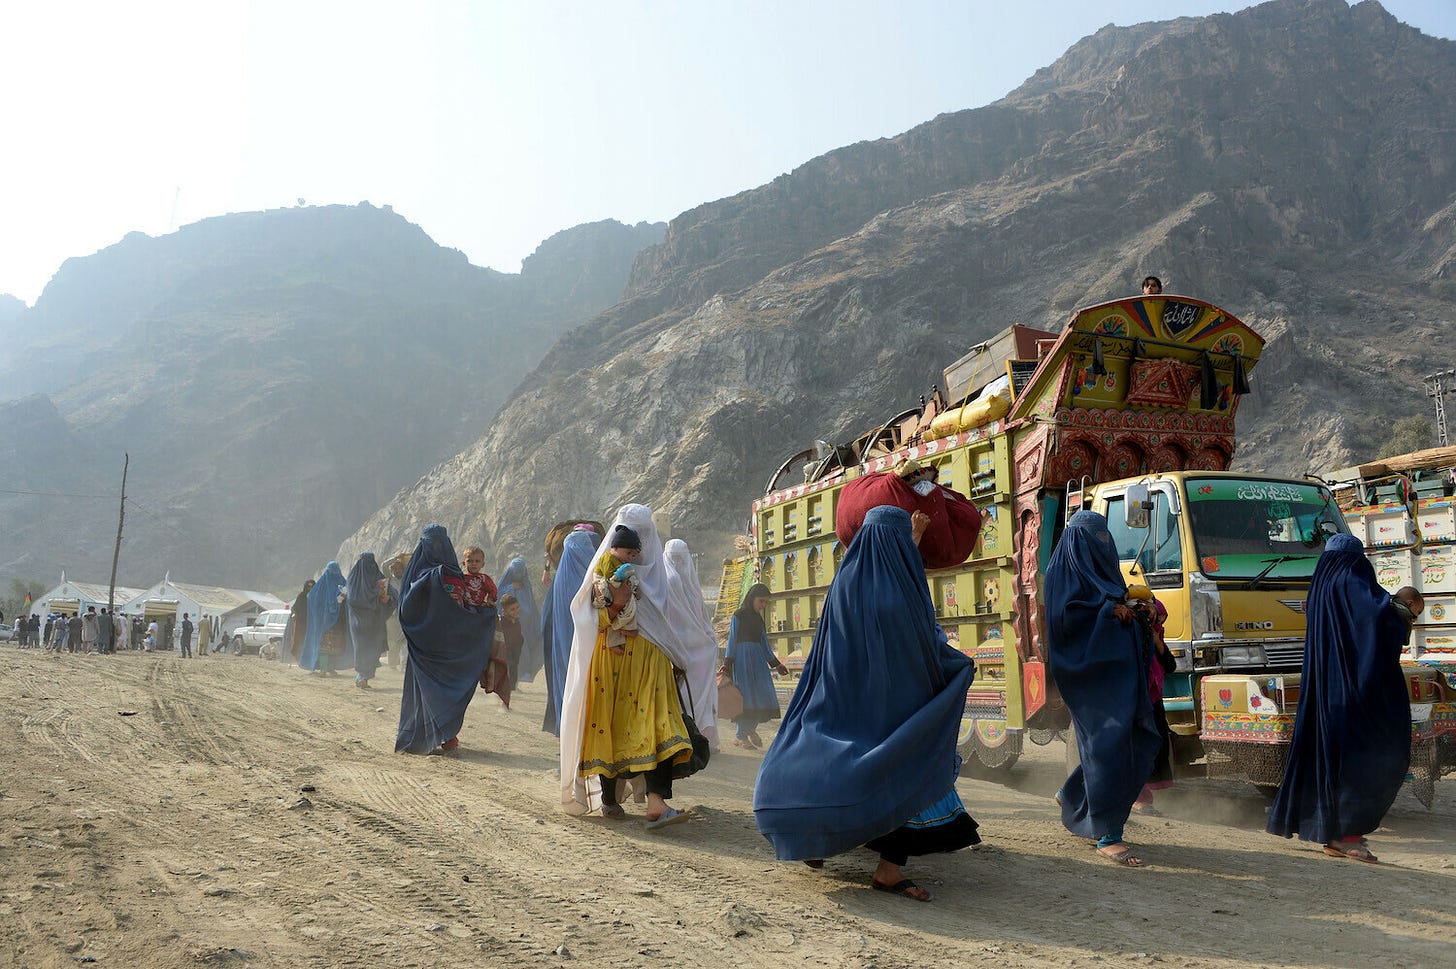 <p>Burqa-clad Afghan refugees arrive at the United Nations High Commissioner for Refugees (UNHCR) repatriation center in Torkham, as they cross through the main border between Afghanistan and Pakistan to return to their home country after fleeing civil war and Taliban rule. Photo: NOORULLAH SHIRZADA/AFP/Getty Images</p>